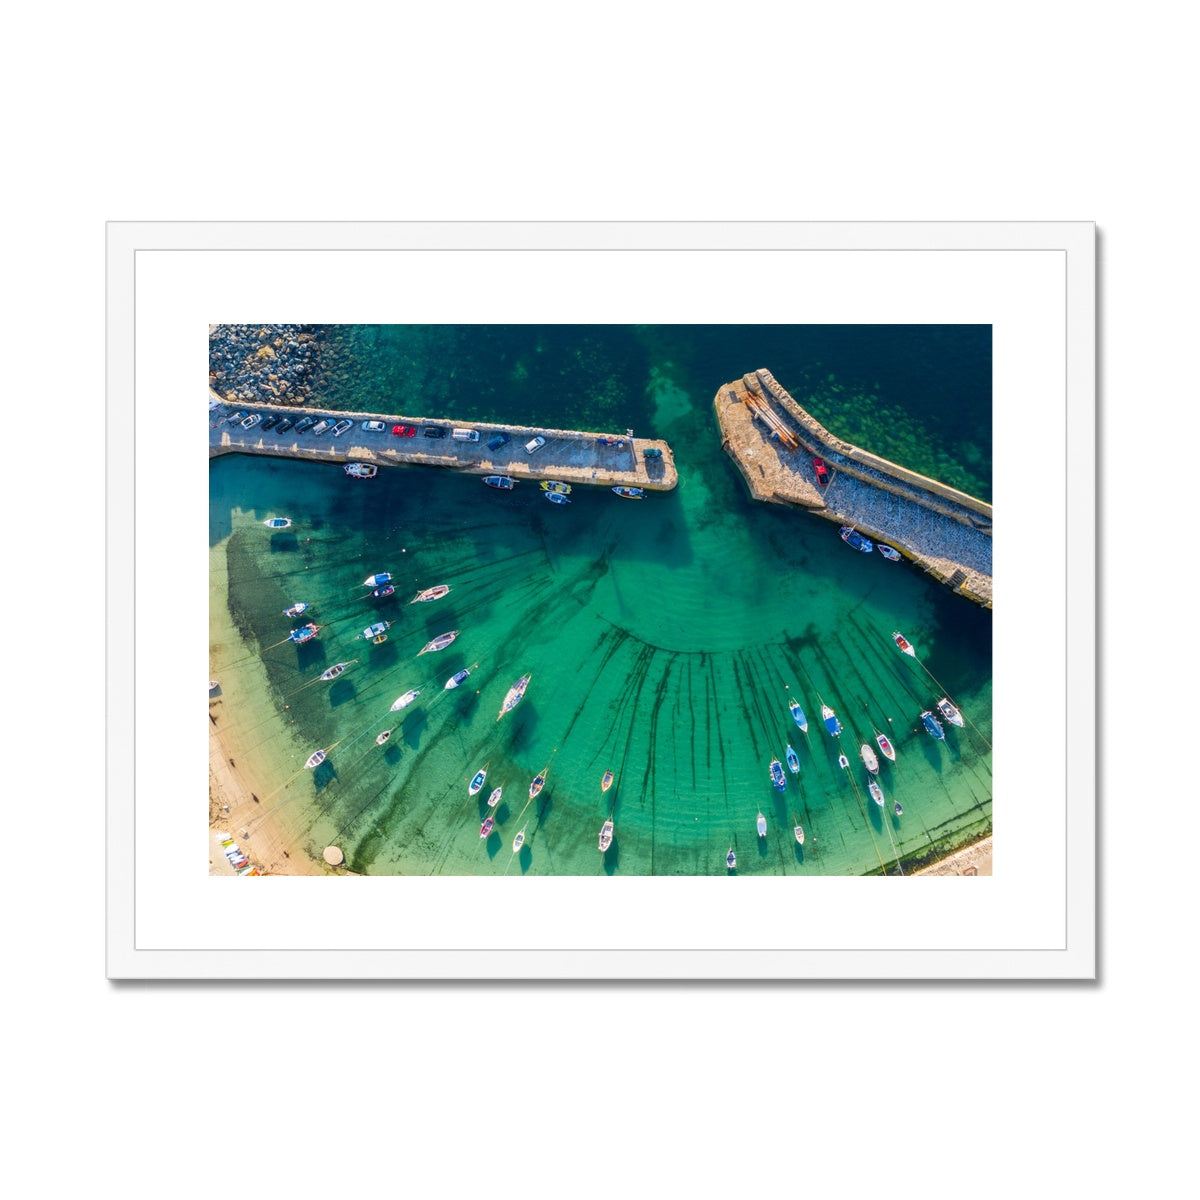 mousehole harbour white frame